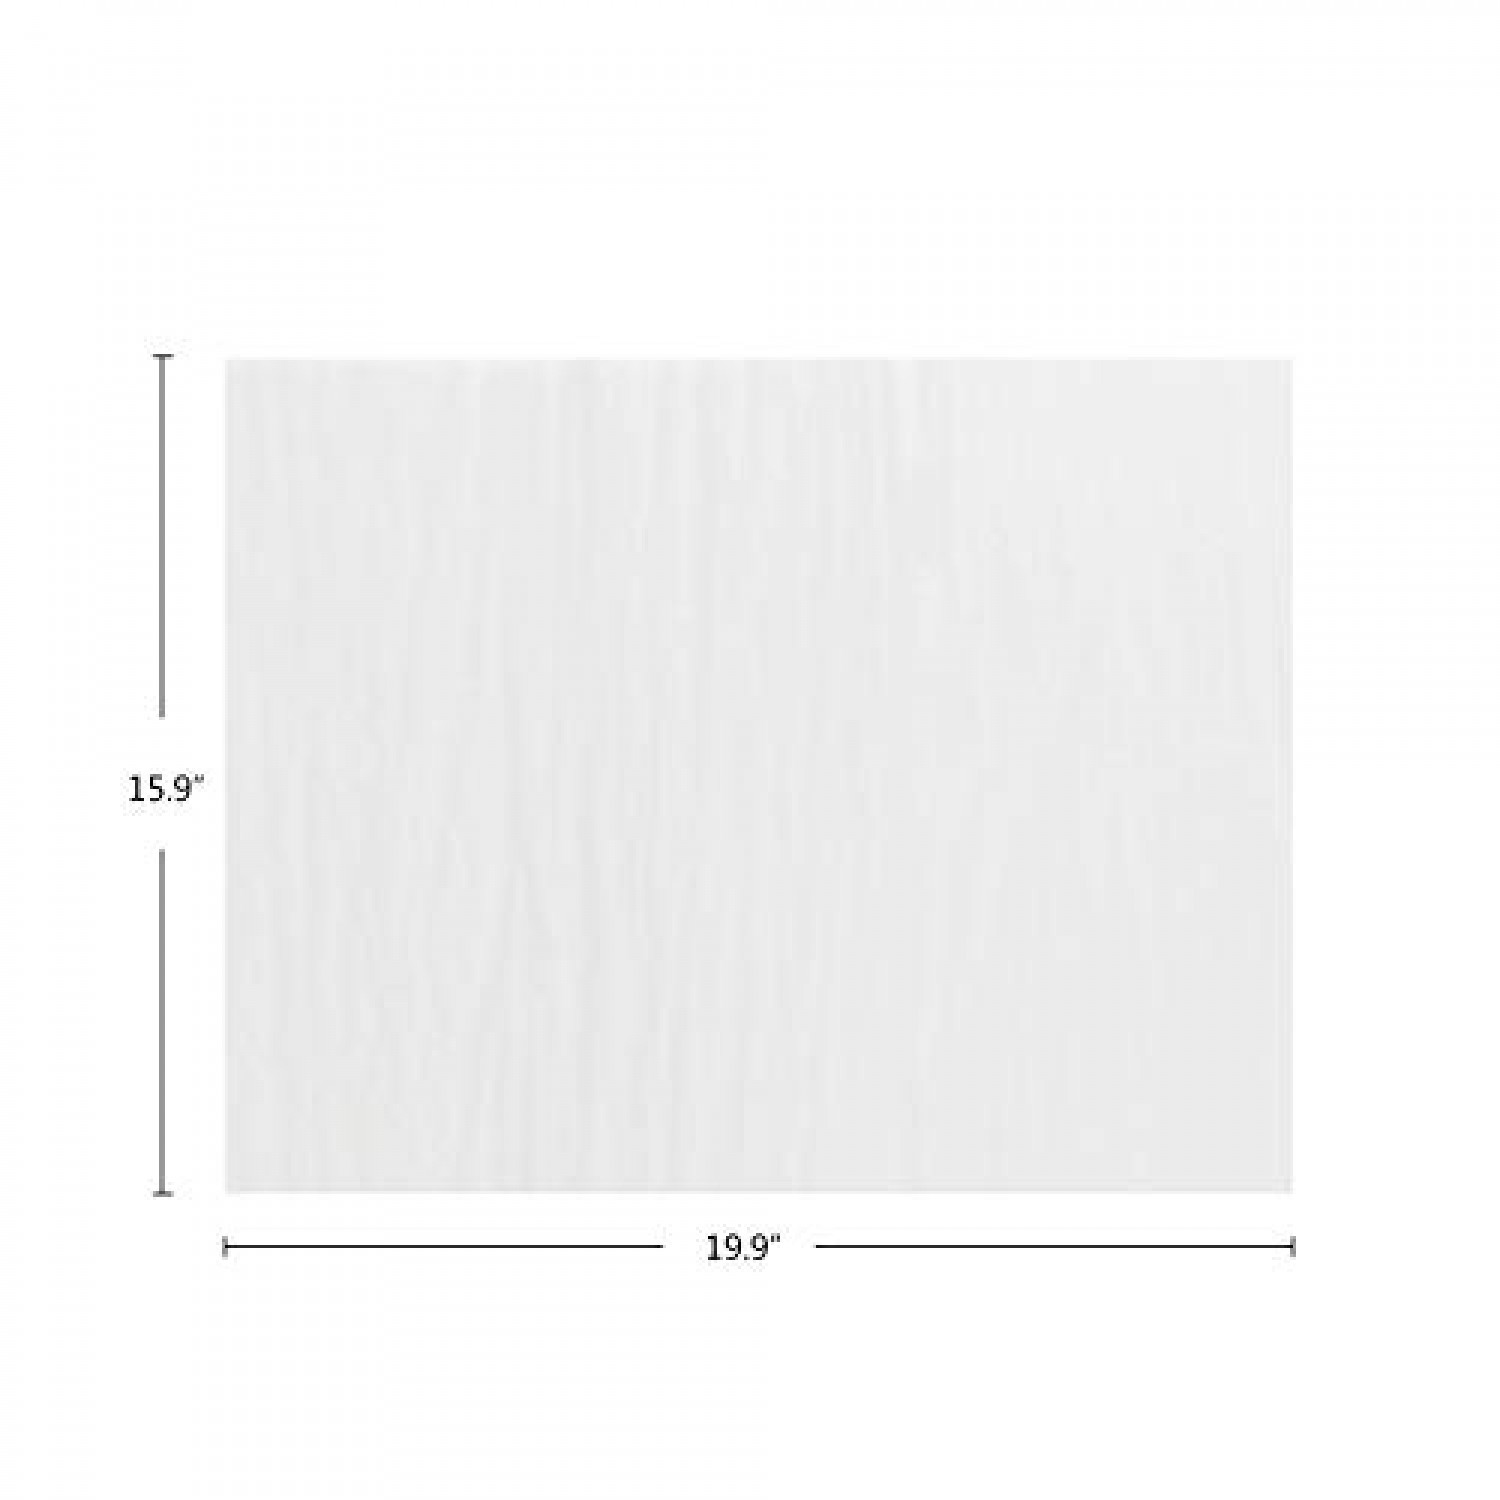 White Tissue Paper Segarty 500 Sheets 16 x 20 inch Wrapping Tissue Paper Bulk, 